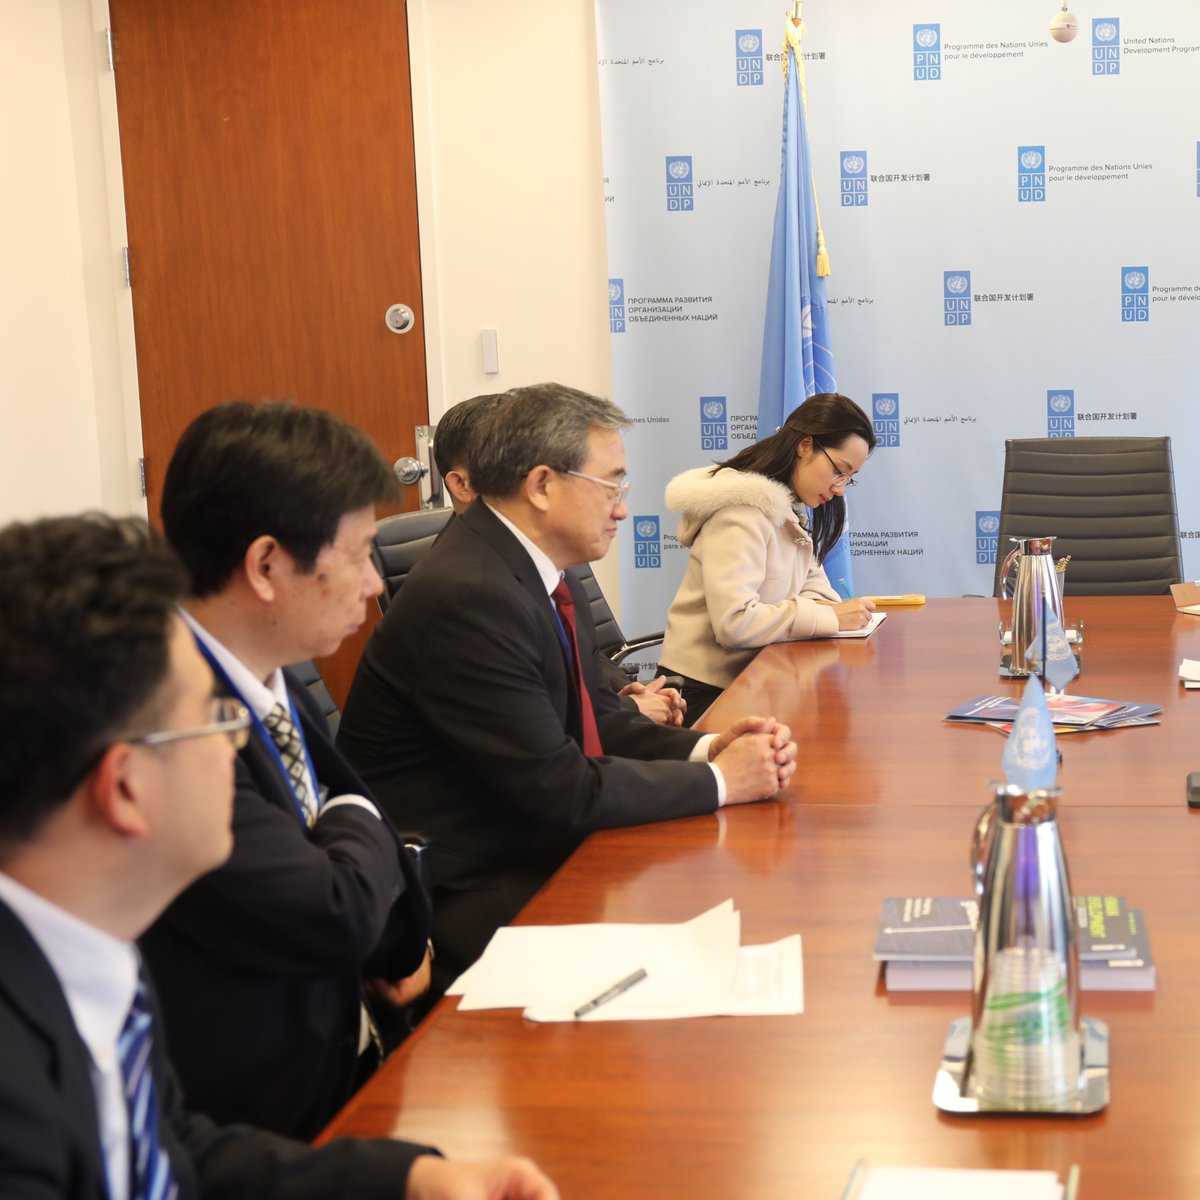 A great pleasure to meet with HE Liu Zhenmin, China's special envoy for #climatechange and trusted friend. We discussed the pathways towards #CoP29 and #CoP30, China’s perspectives and @UN/@UNDP #ClimatePromise2025 to support 125 developing countries in preparing their #NDCs.